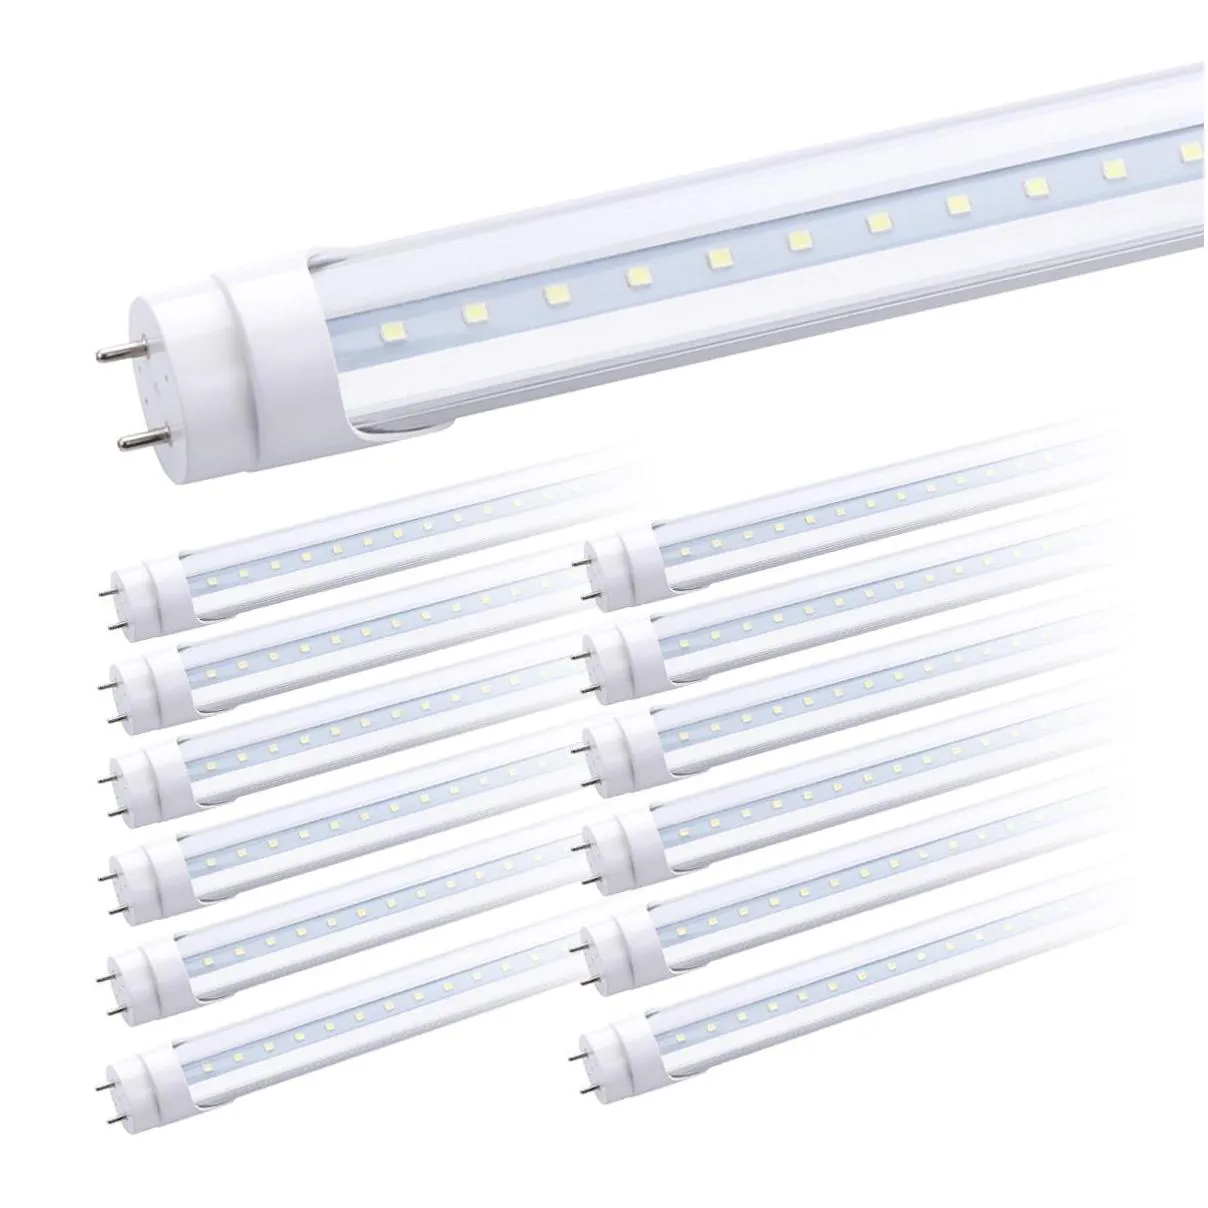 4ft led tube t8 18w 22w 28w g13 bi pin 4 garage warehouse lights 4 feet shop light fluorescent lamp replacement ballast removed dual ended